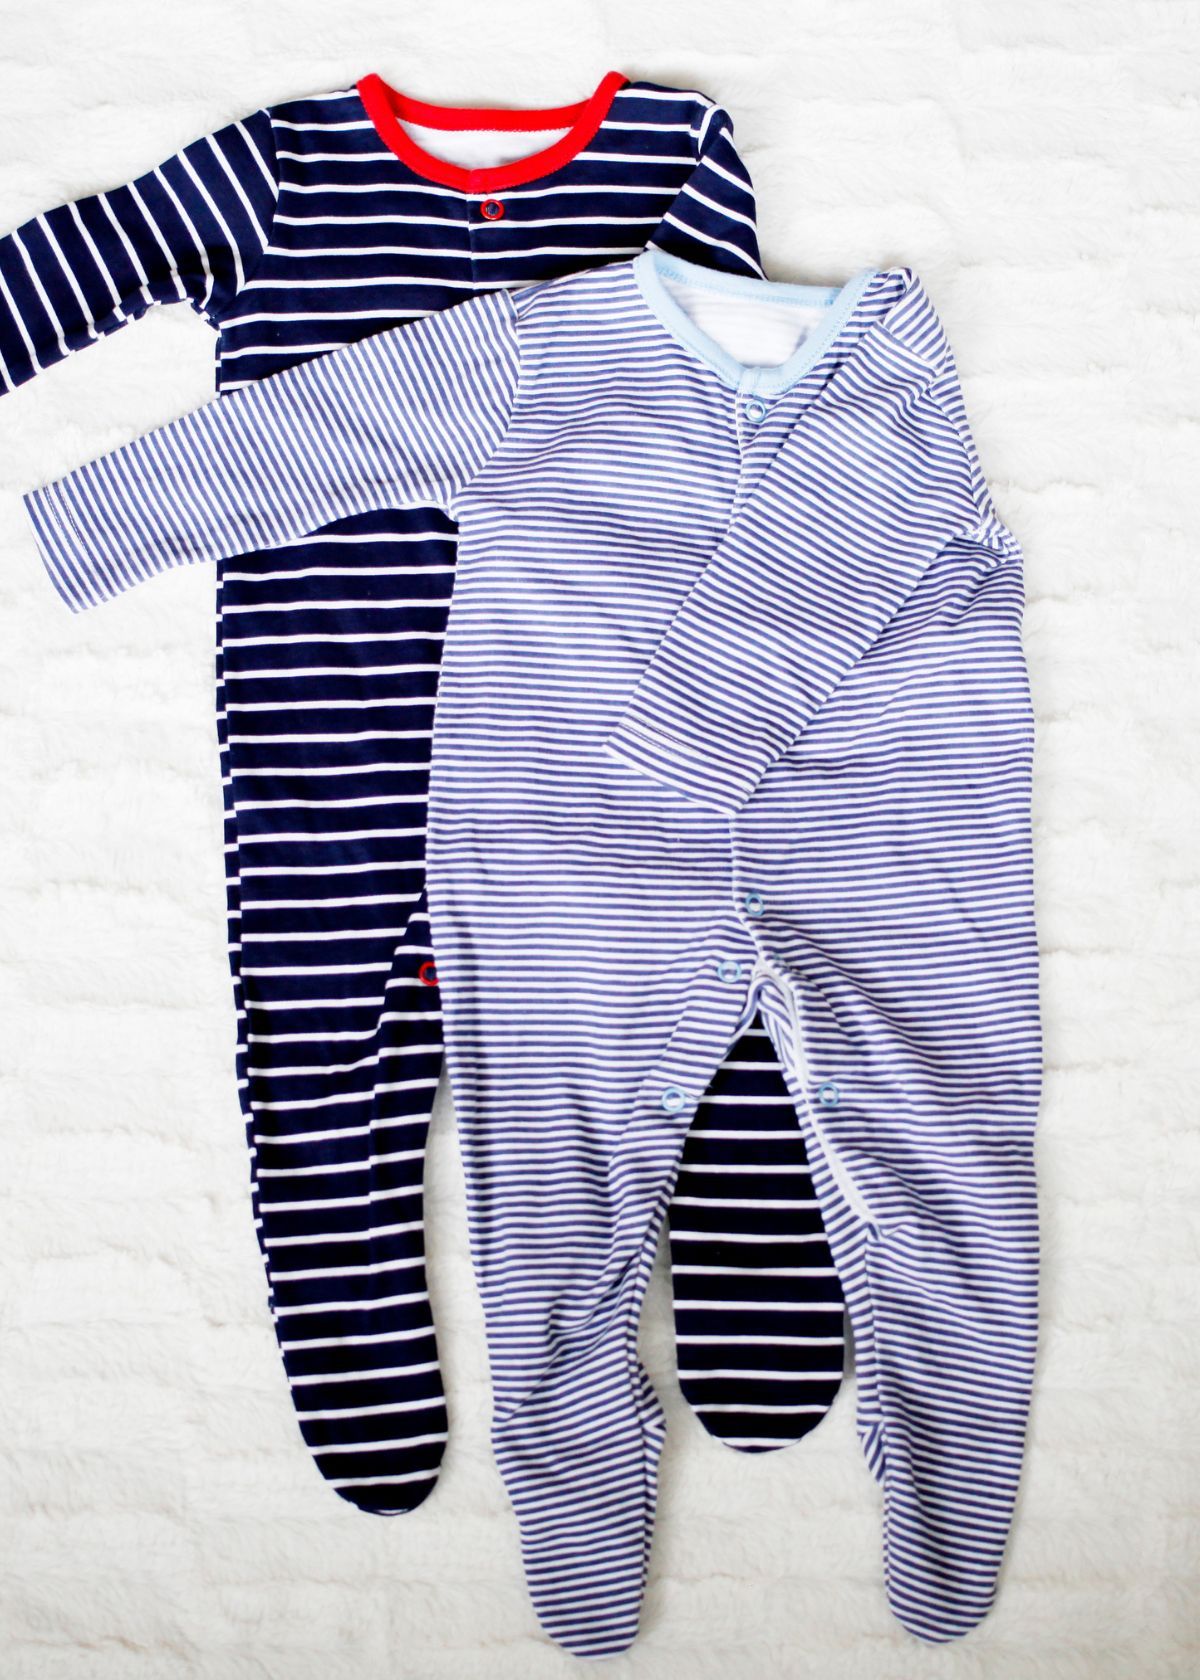 Best Bamboo Pajamas for Toddlers